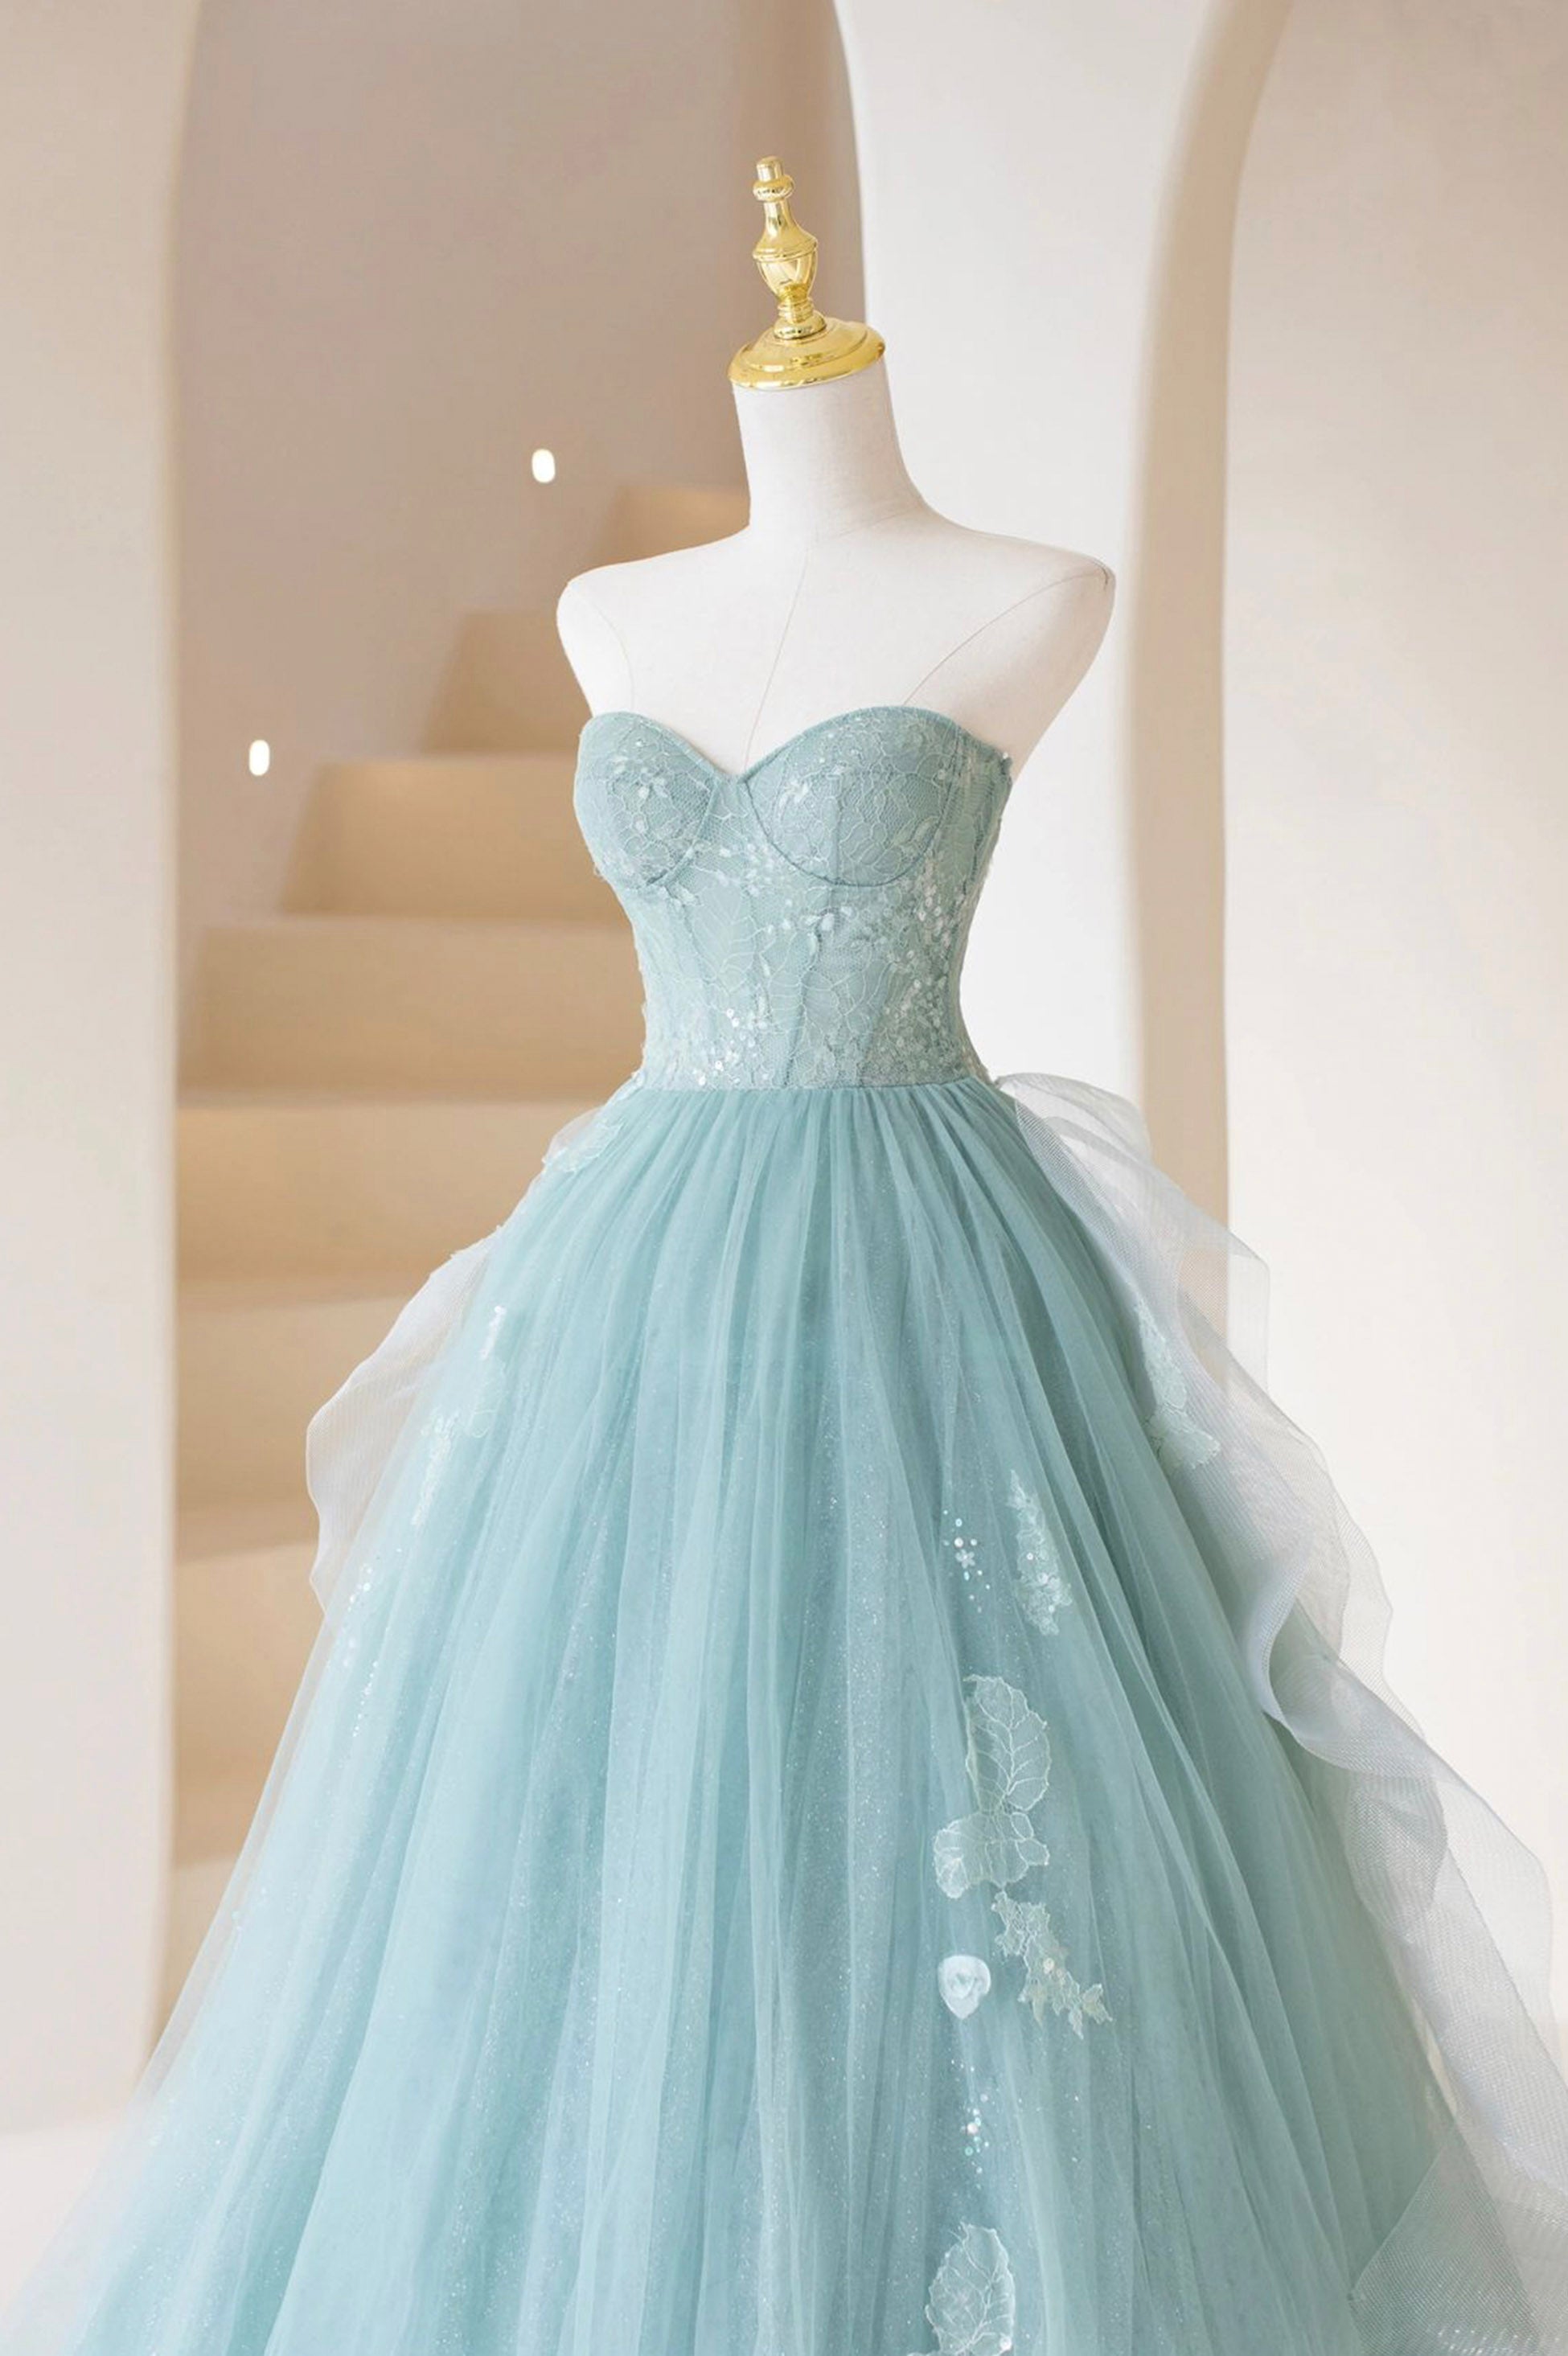 Prom Dresses Ball Gown Elegant, Lovely Sweetheart Neckline Tulle Long Prom Dress with Lace, Strapless Evening Dress